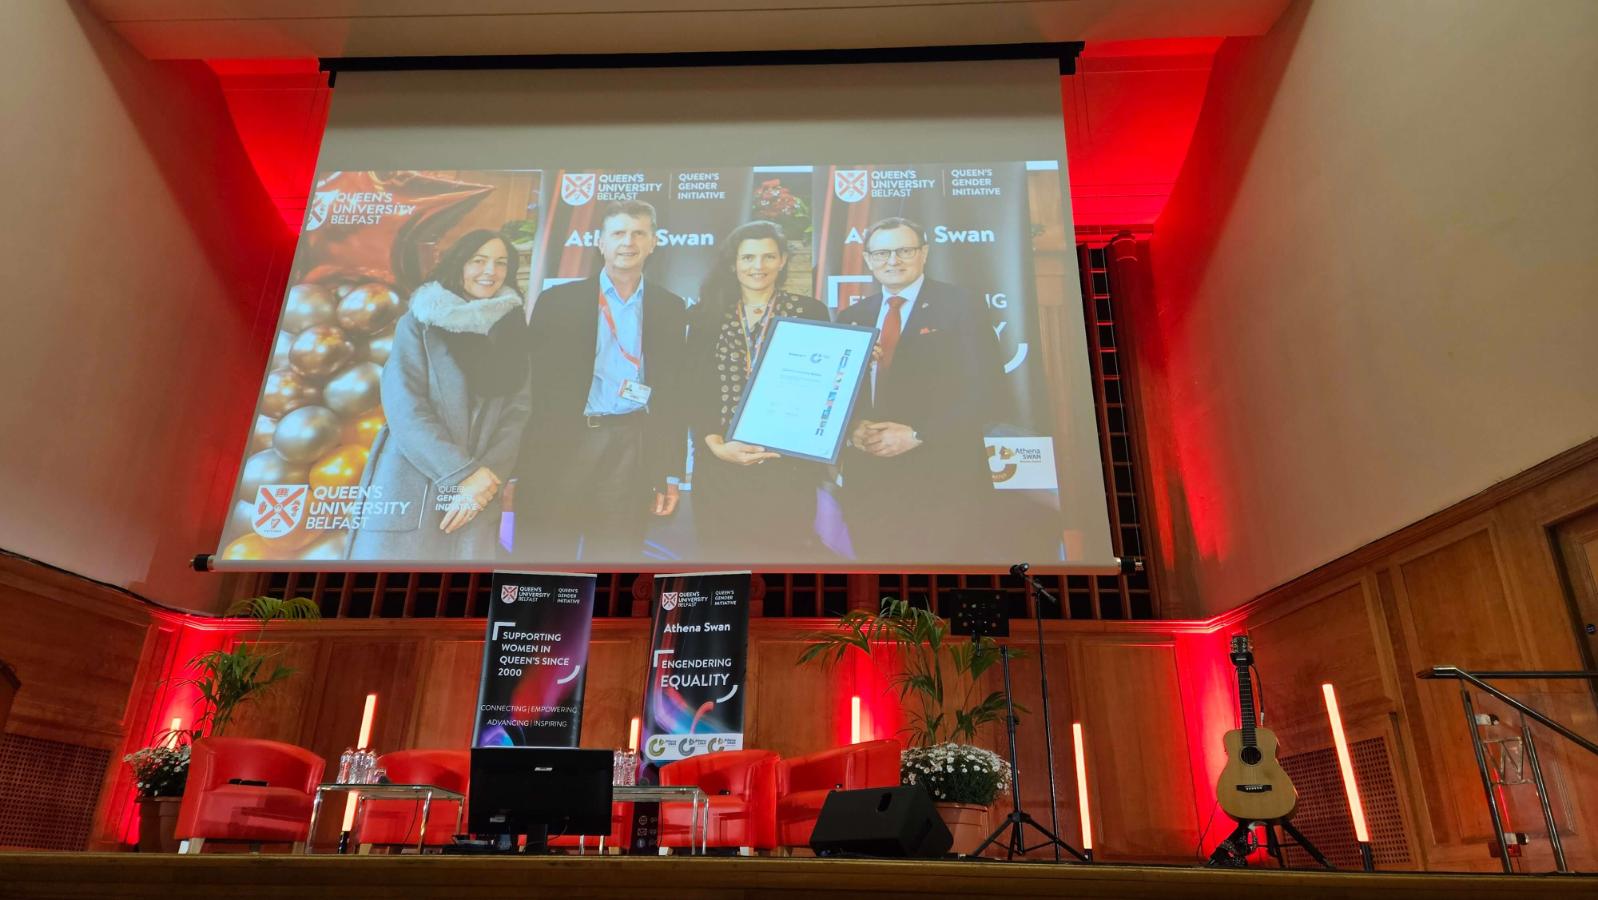 A stage set for an event with red chairs and a guitar, featuring a large projected image of people holding a framed certificate, with Queen's University Belfast and Athena SWAN branding in the background.